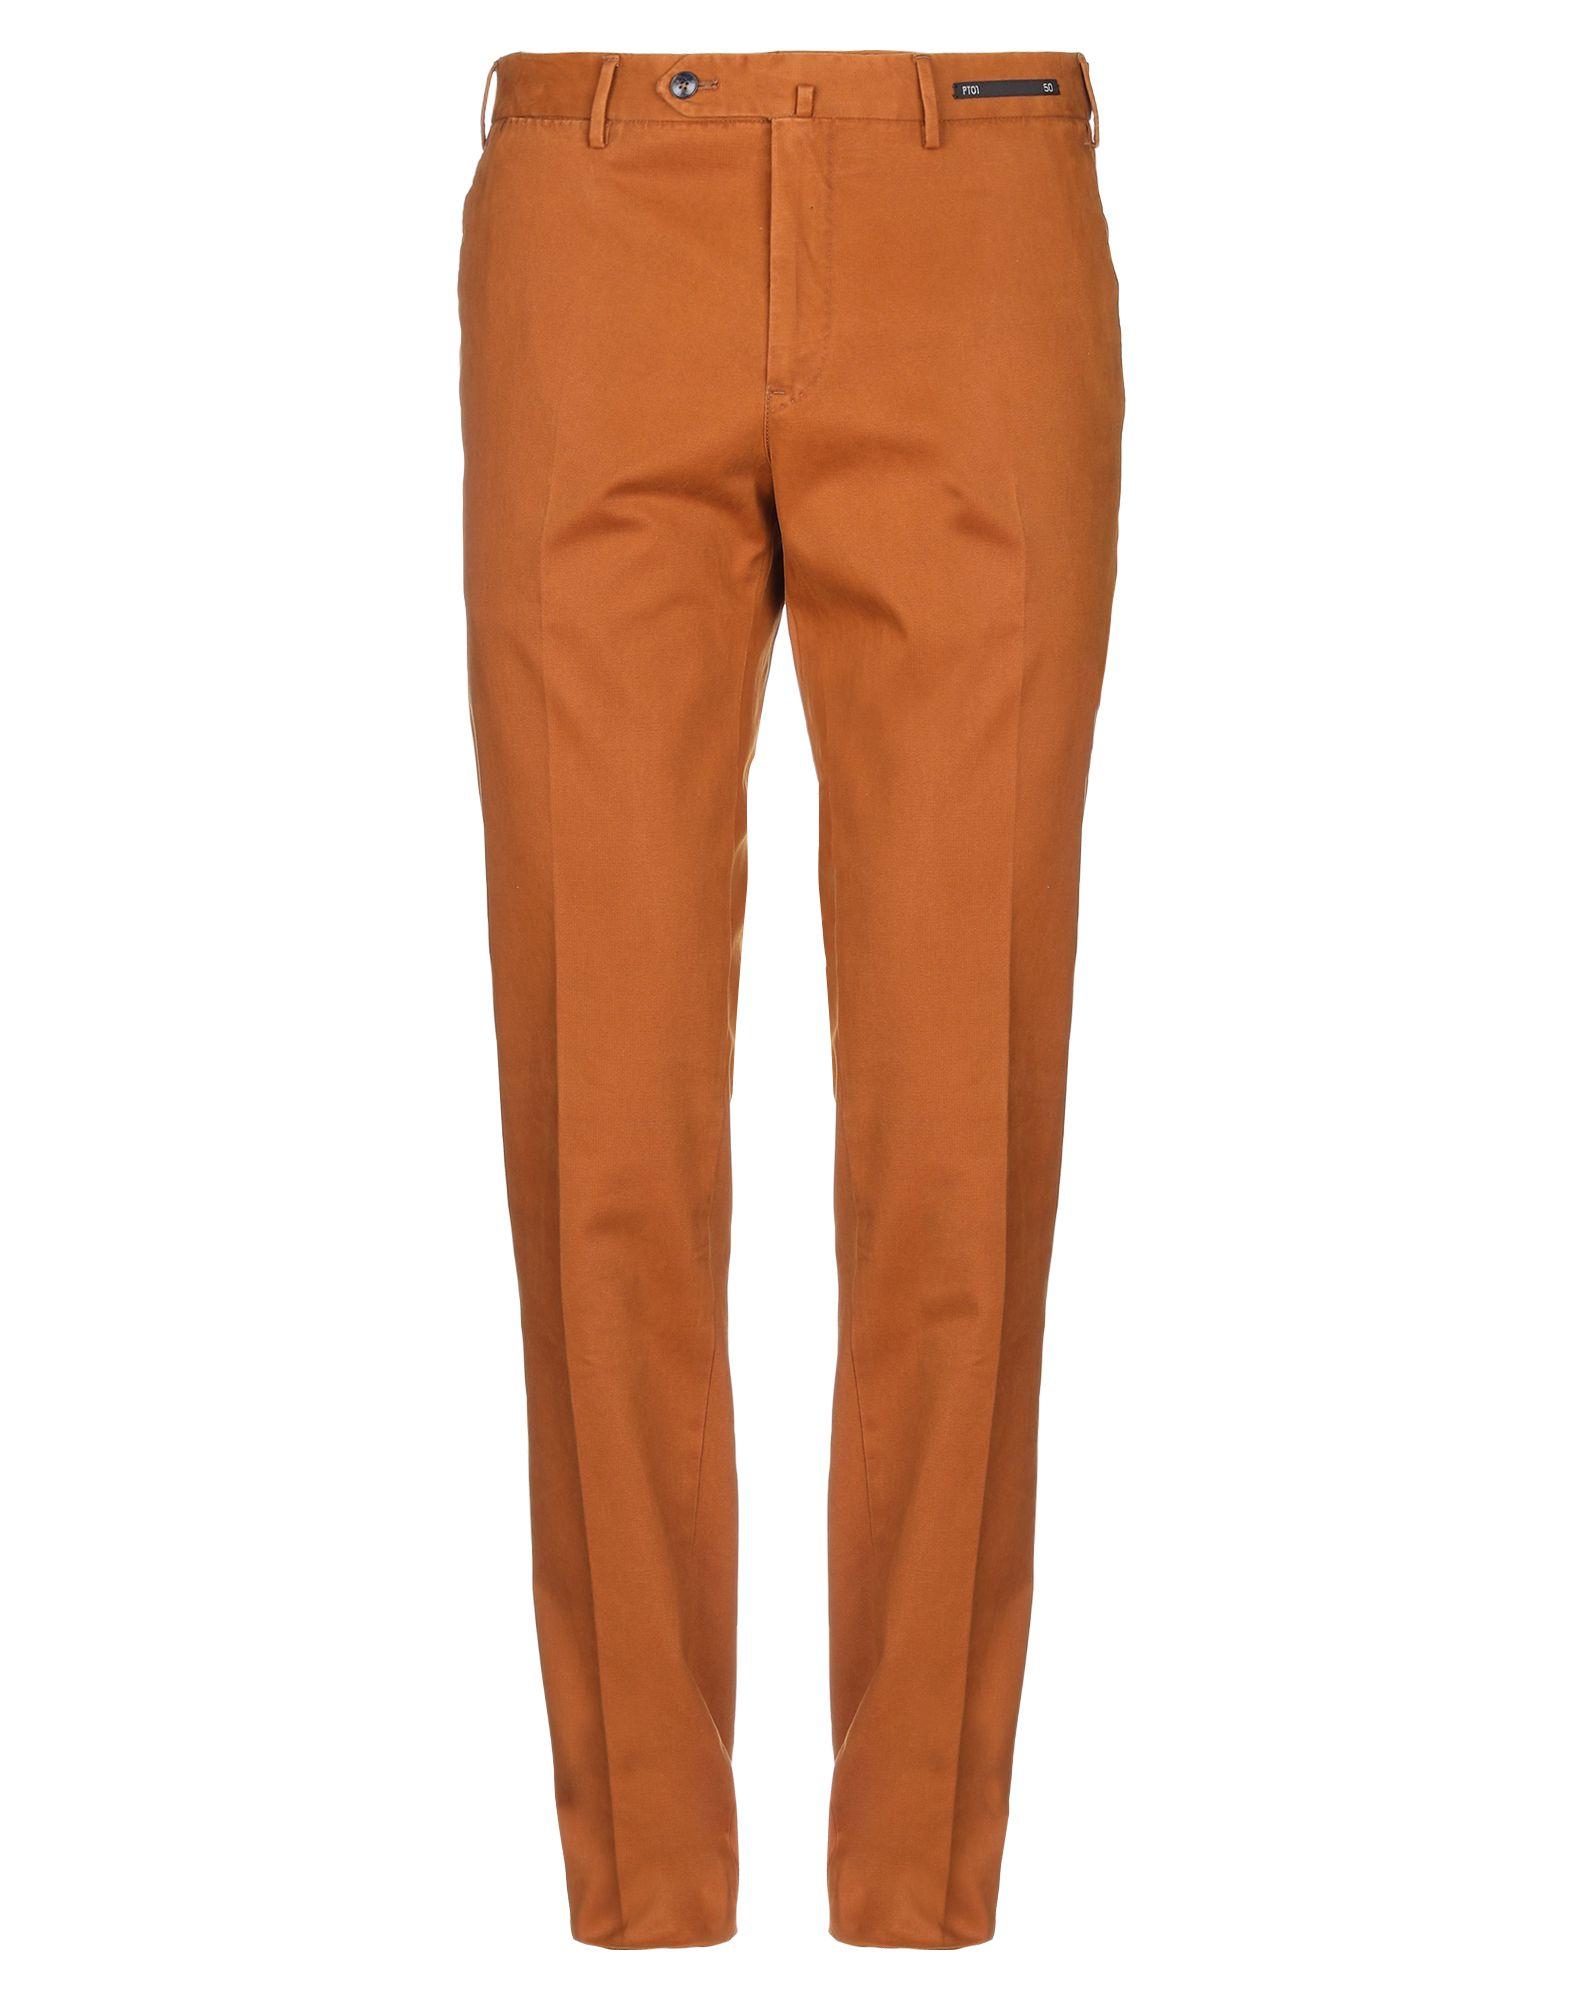 PT01 Casual Pants in Brown for Men - Lyst